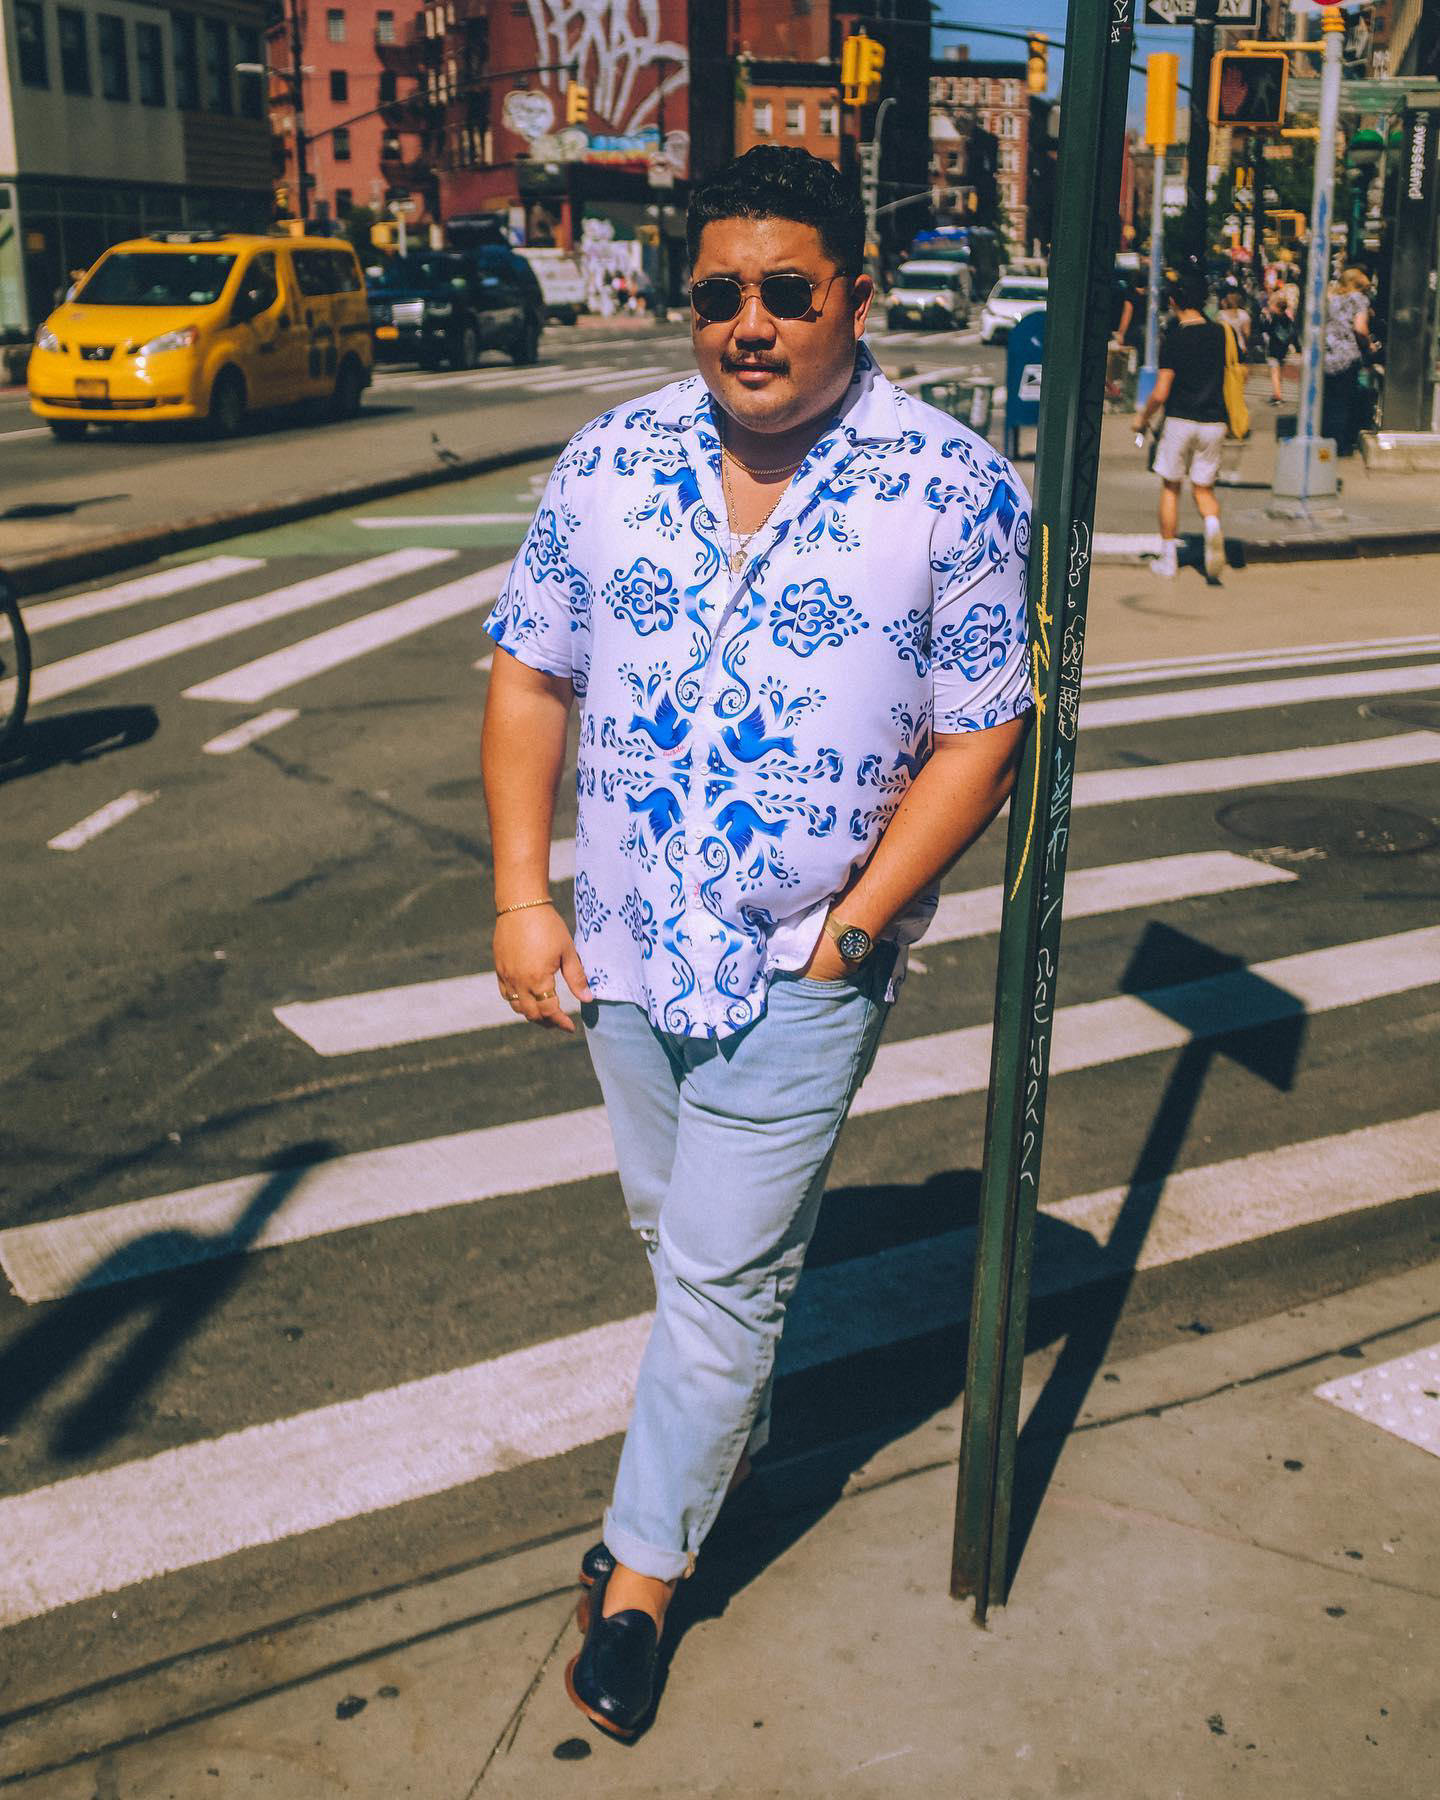 image  1 Nick Urteaga - Was never one for a shirt that blended in with everyone else